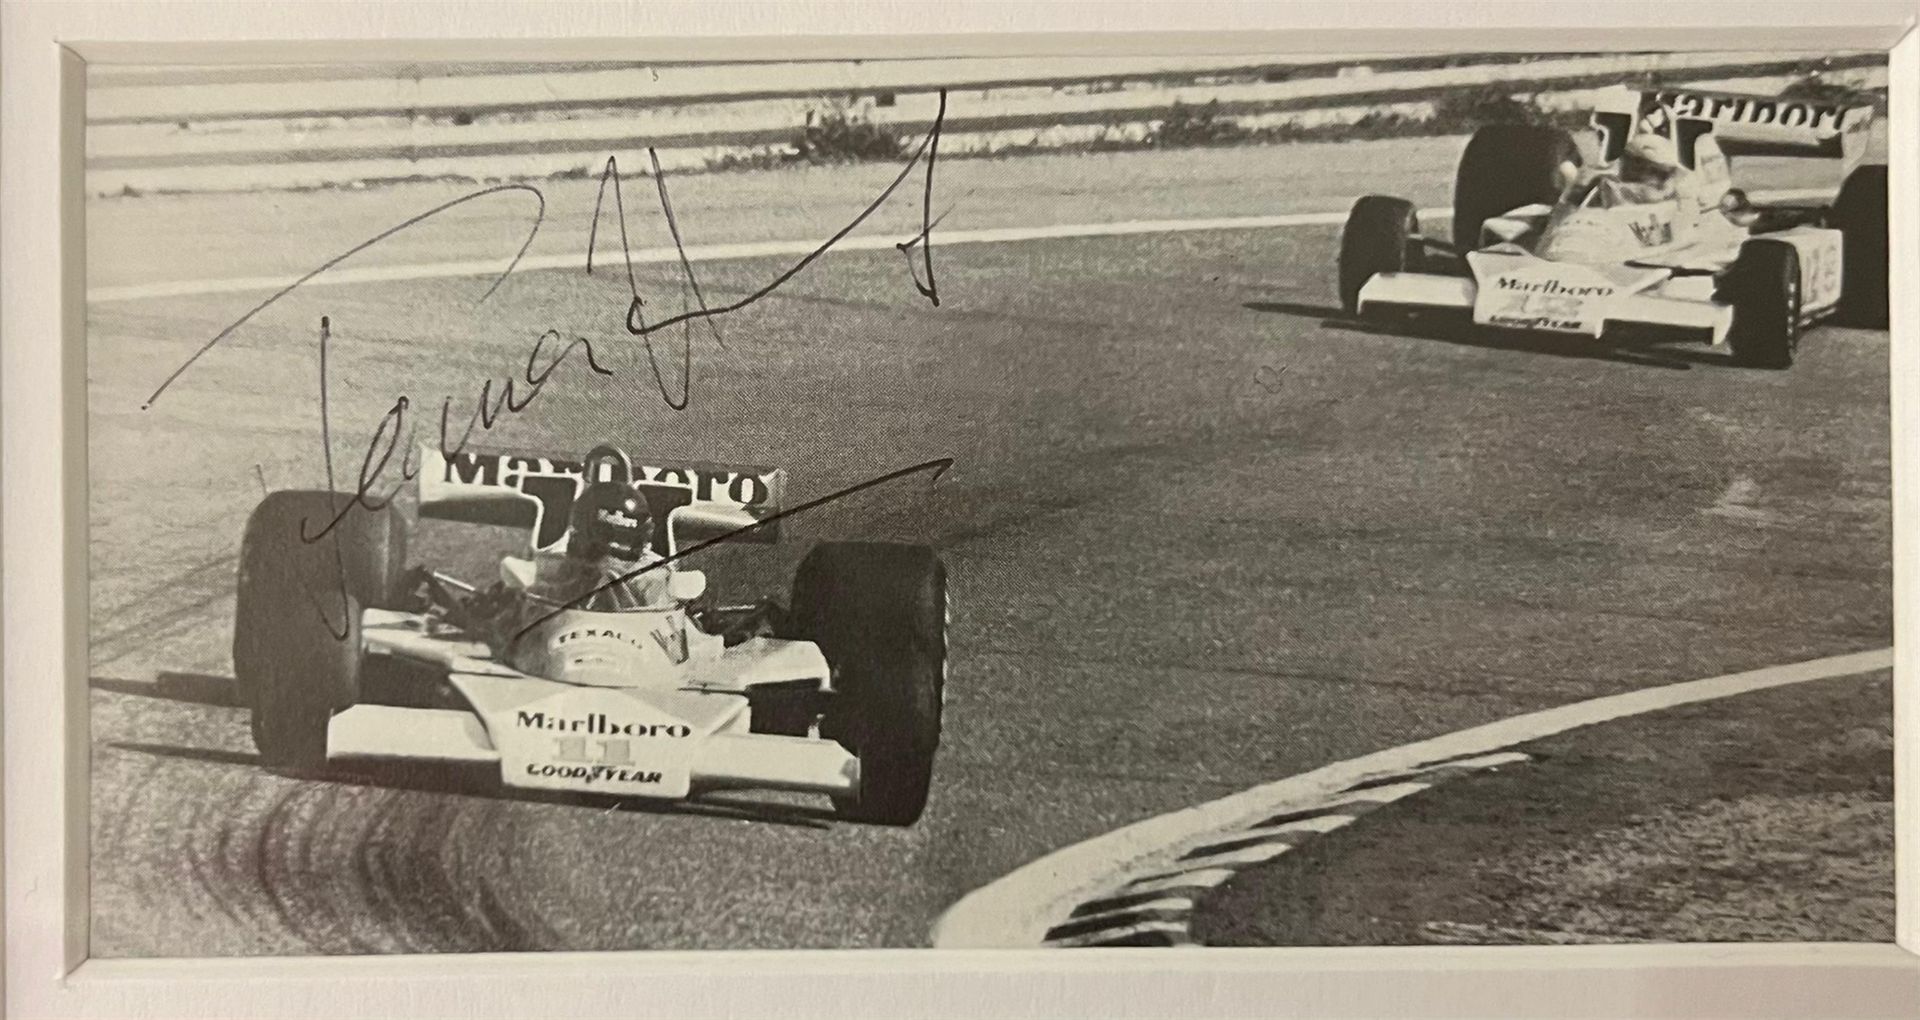 Lauda v Hunt Framed Production with signed B/W images of Both Drivers - Image 3 of 5